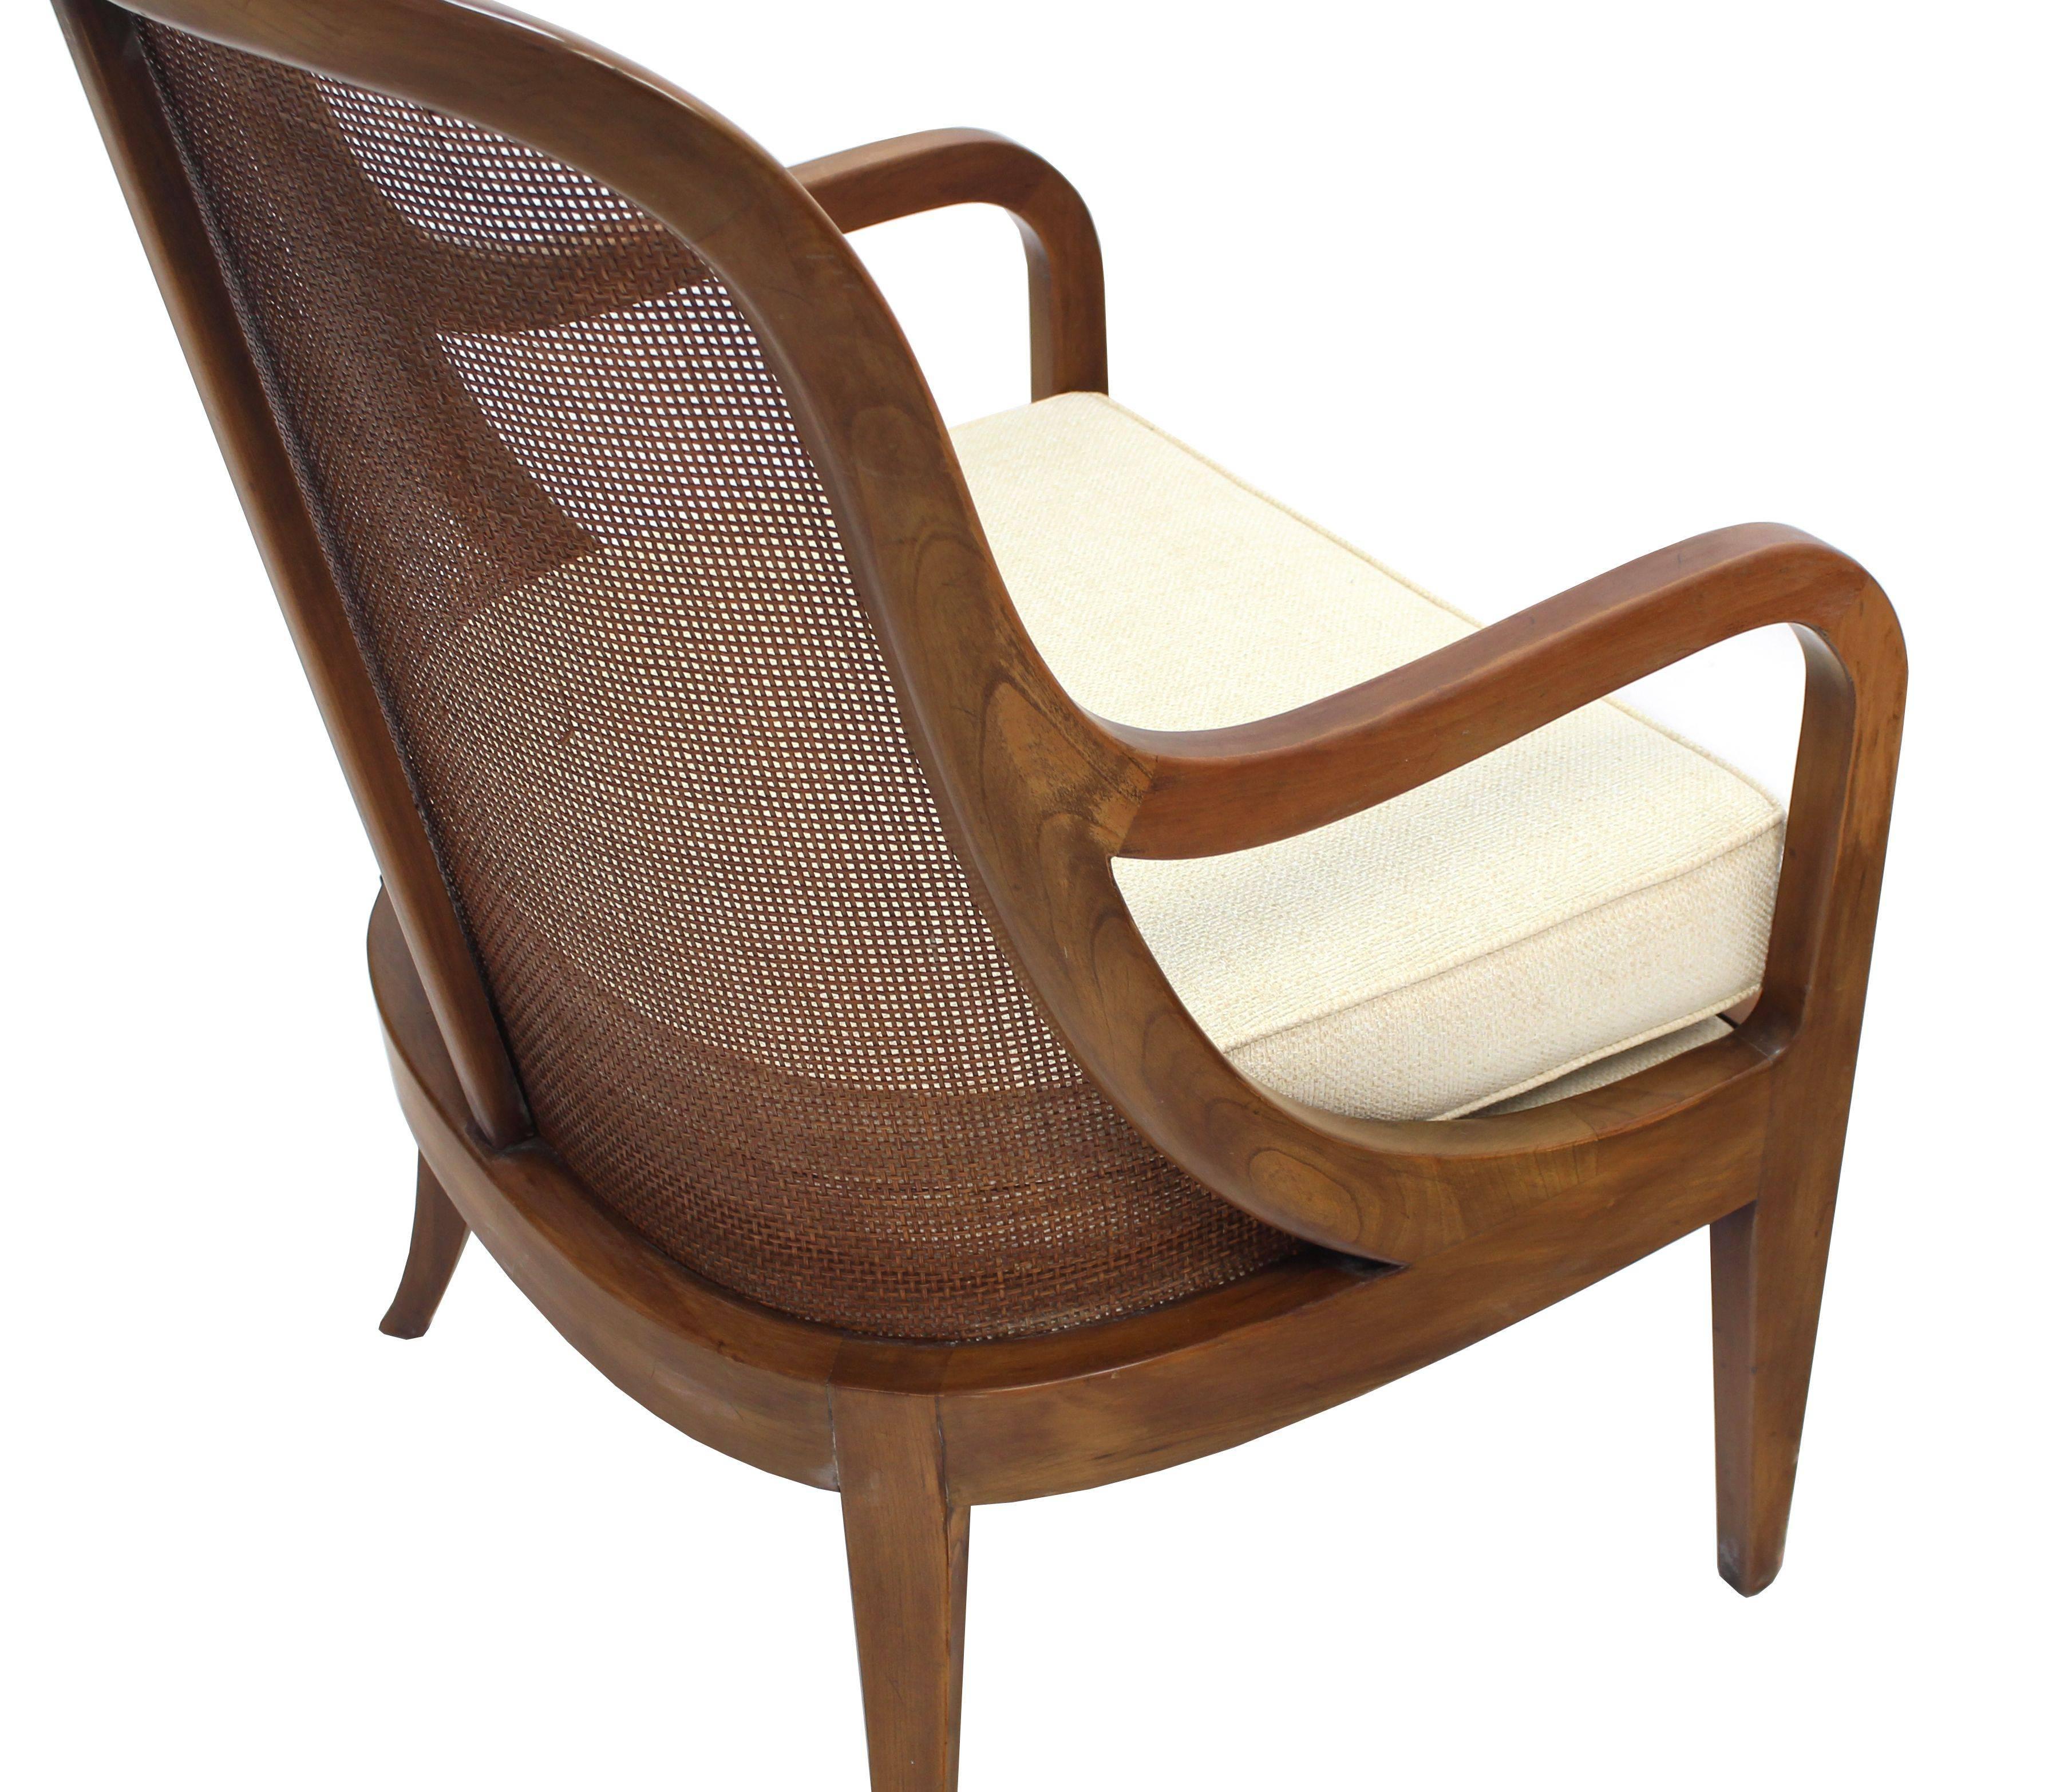 20th Century New Upholstery Barrel Back Lounge Chair